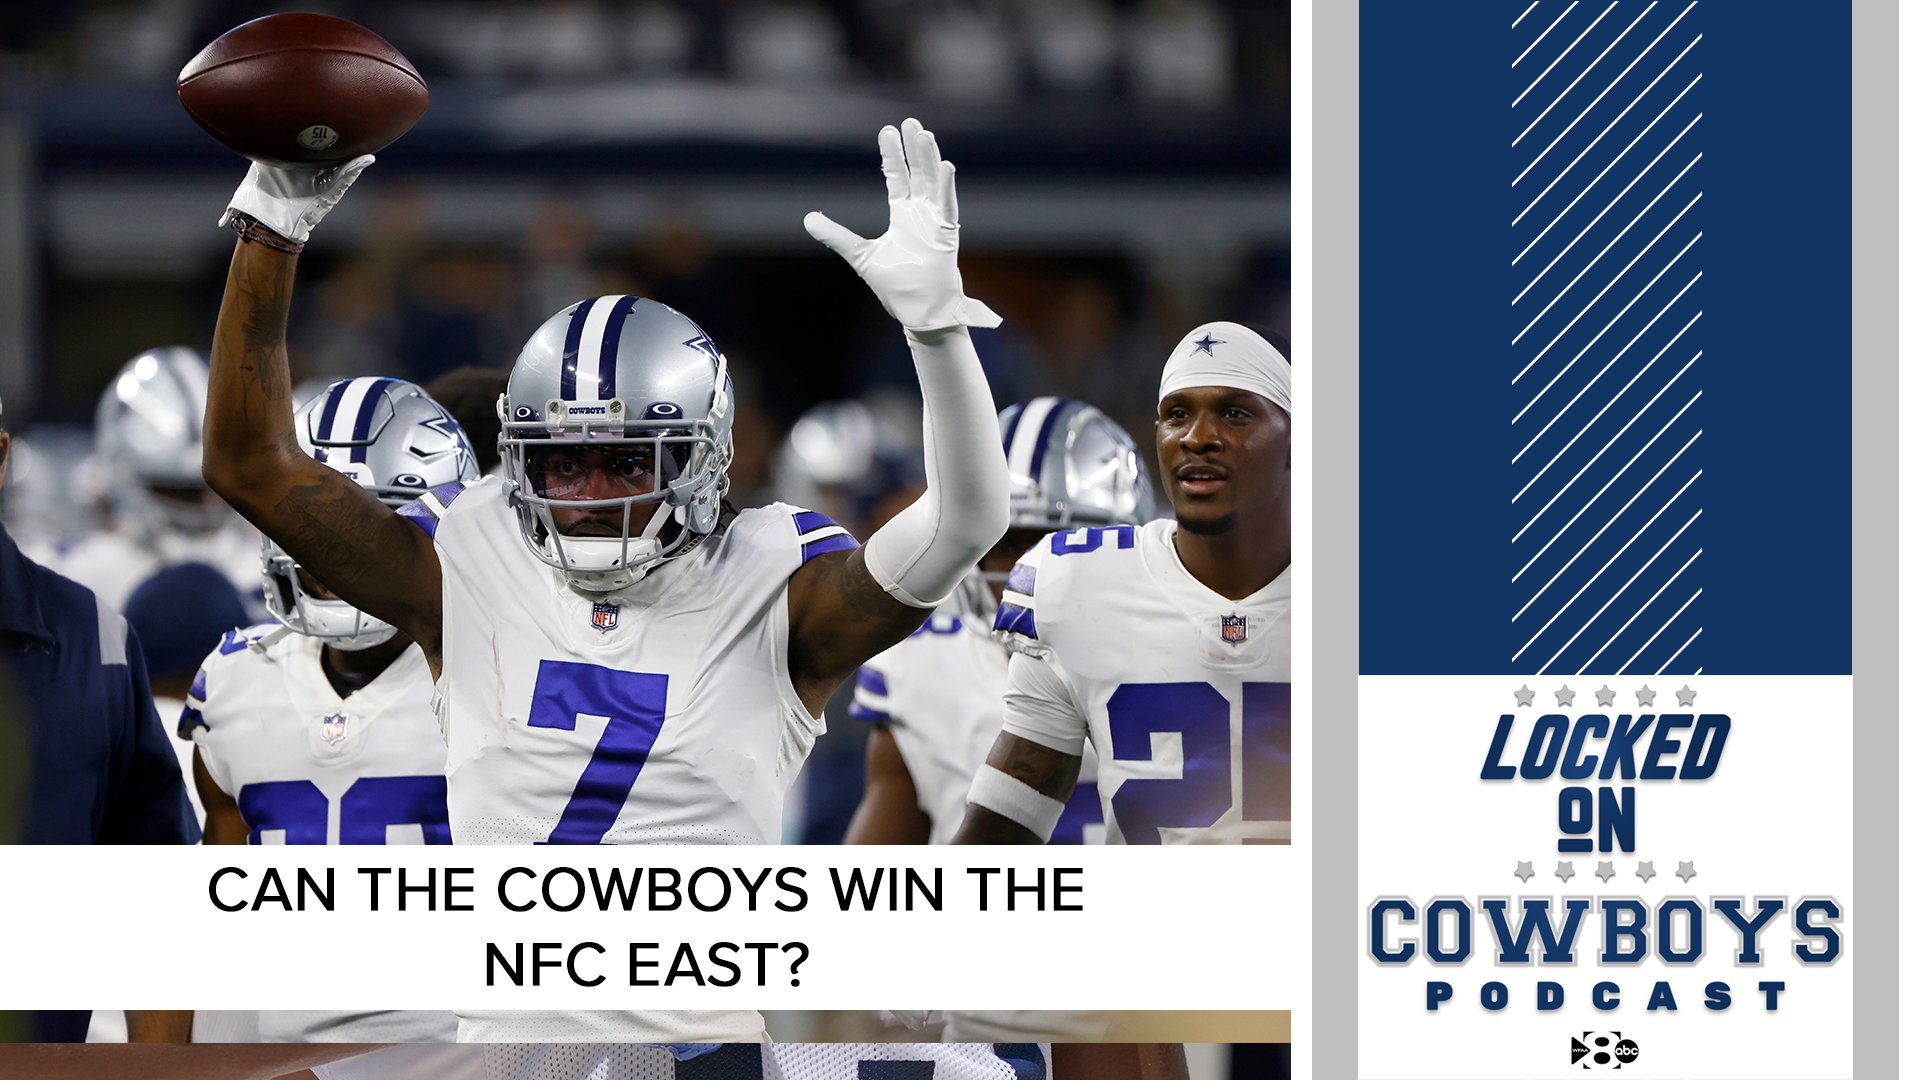 The Cowboys pulled off a decisive in in Philly on Monday night. Can they win their division? @Marcus_Mosher and @McCoolBCB discuss.